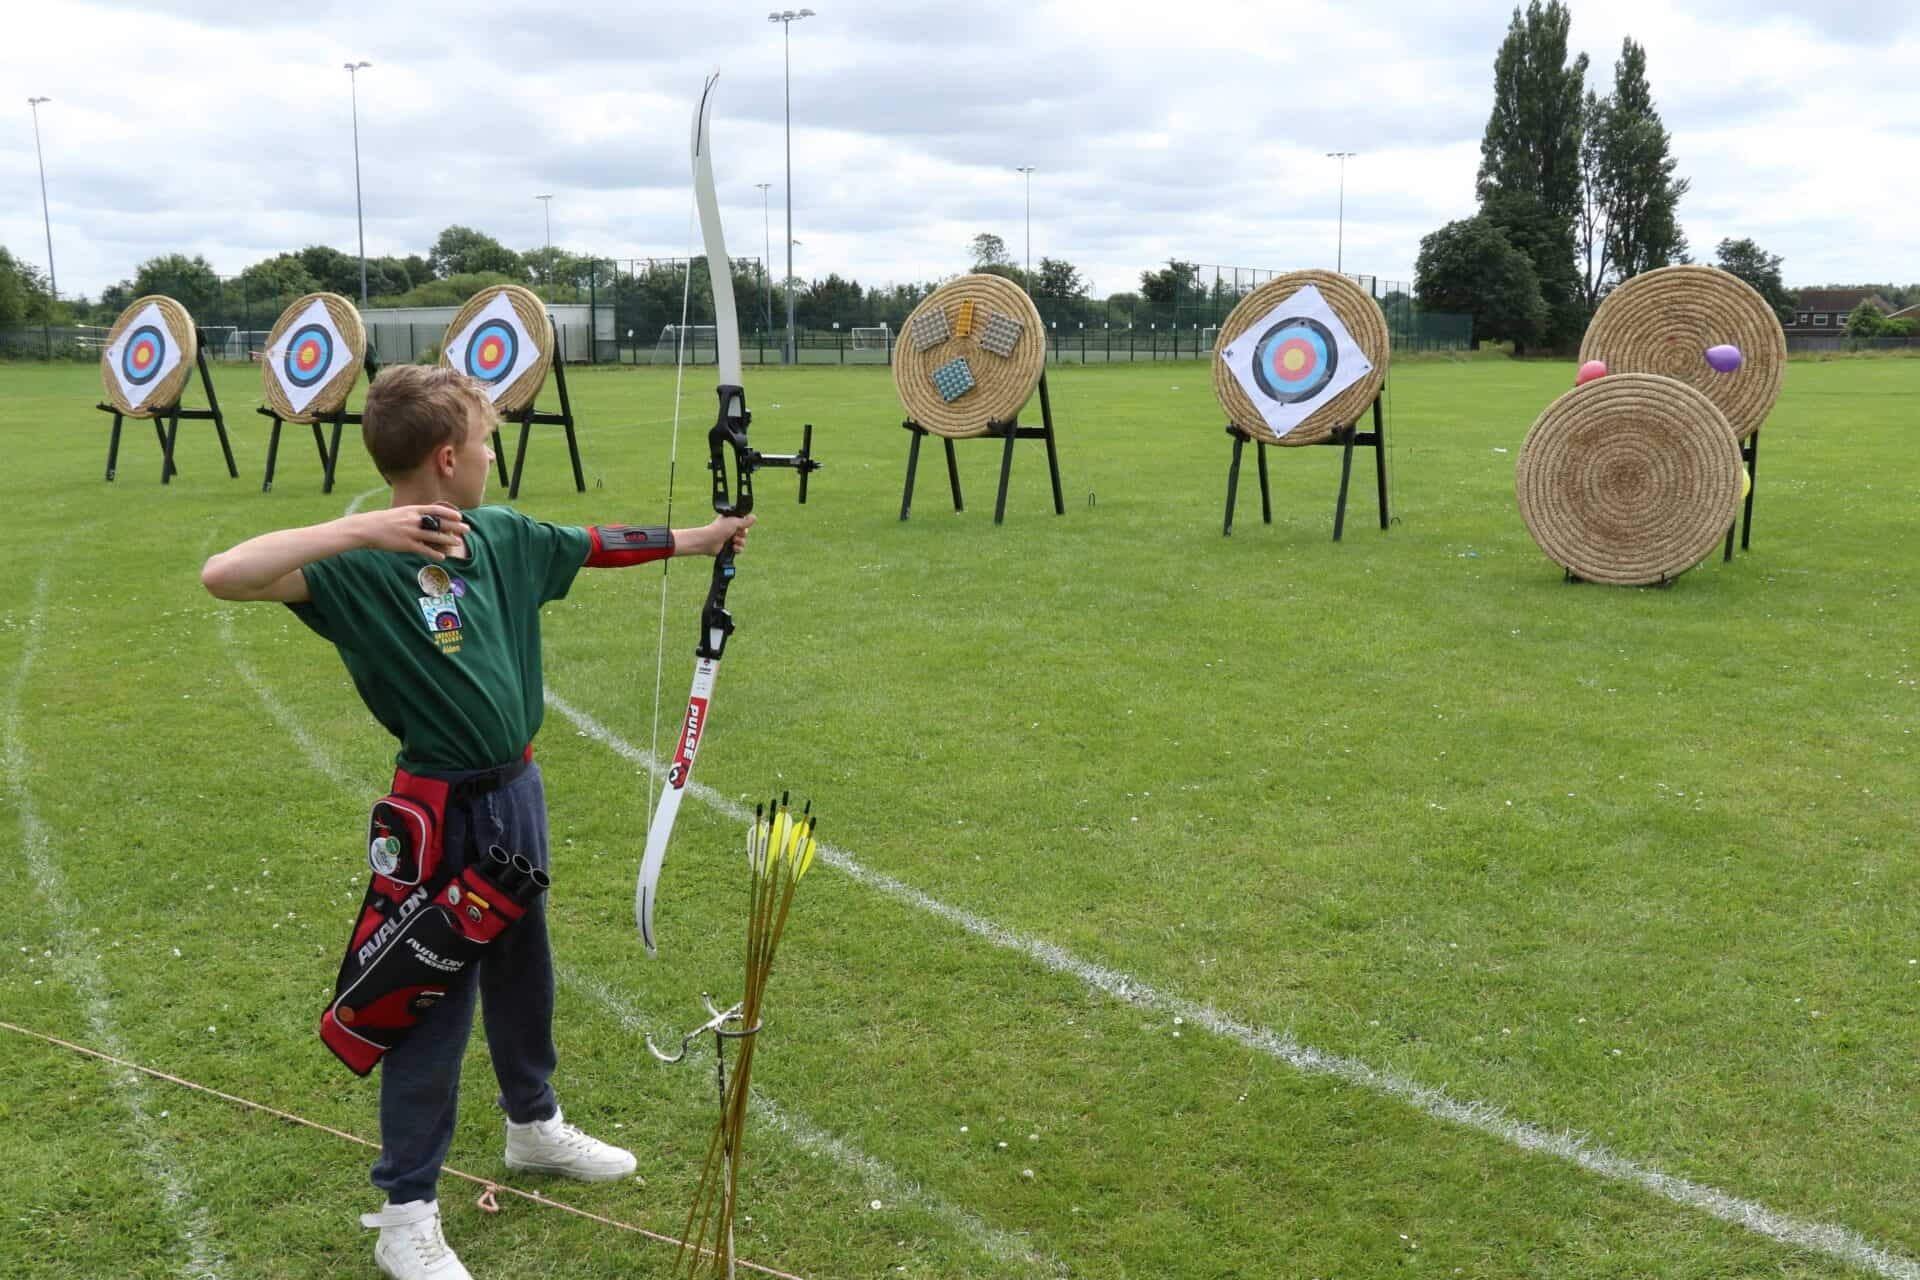 Start Archery Week: planning tips from Archers of Raunds